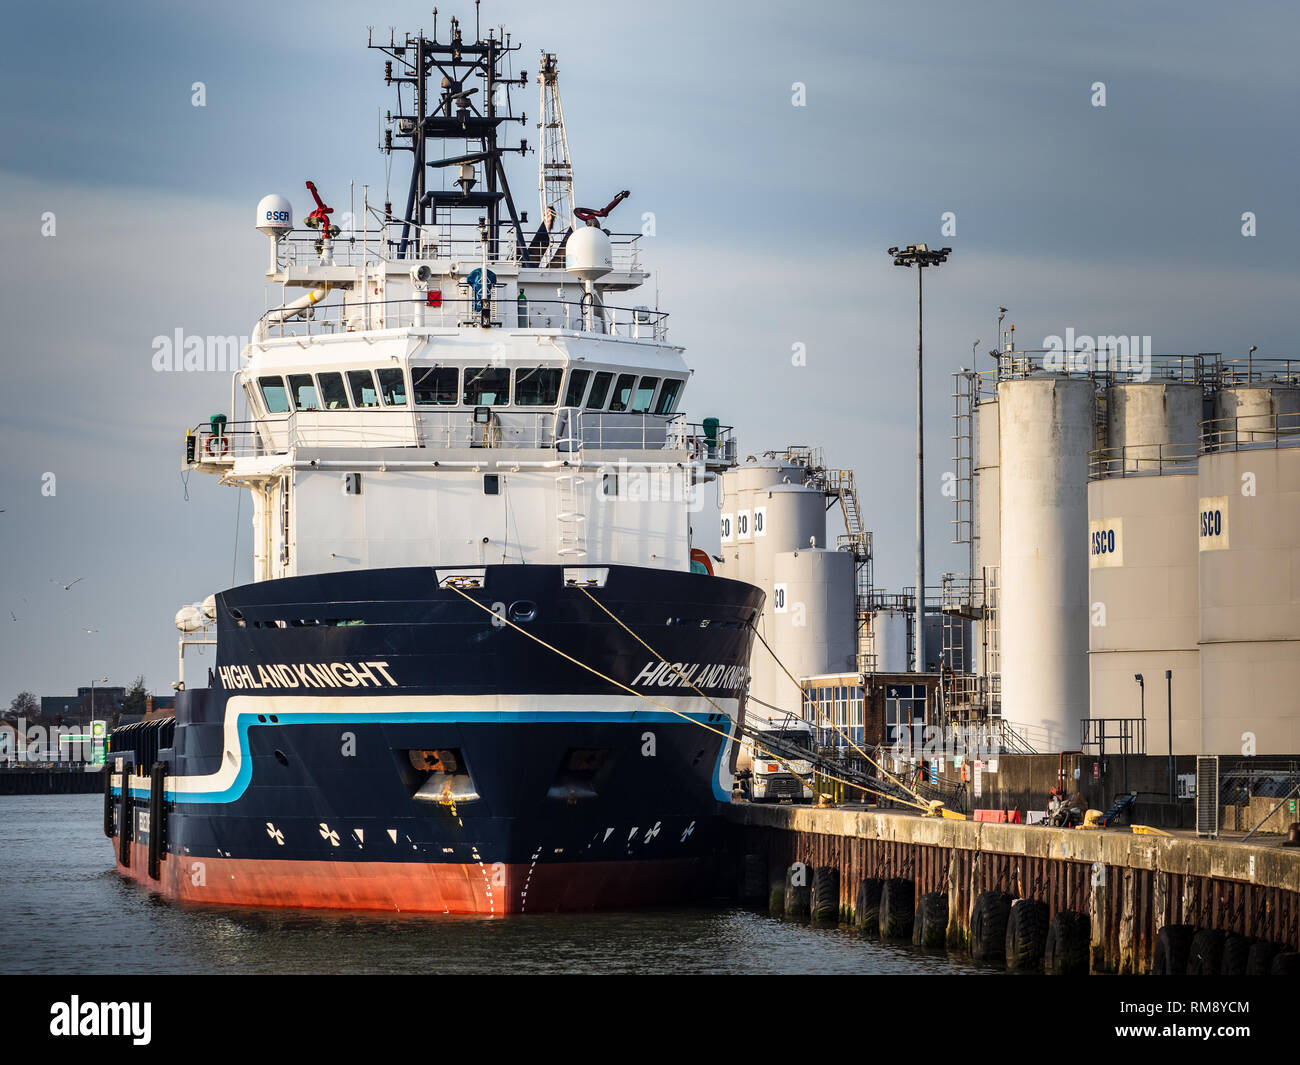 Offshore fornitura navi Grande Yarmouth - la nave Highland Knight Offshore Tug Suport sul fiume Yare Quay a Great Yarmouth Norfolk Foto Stock